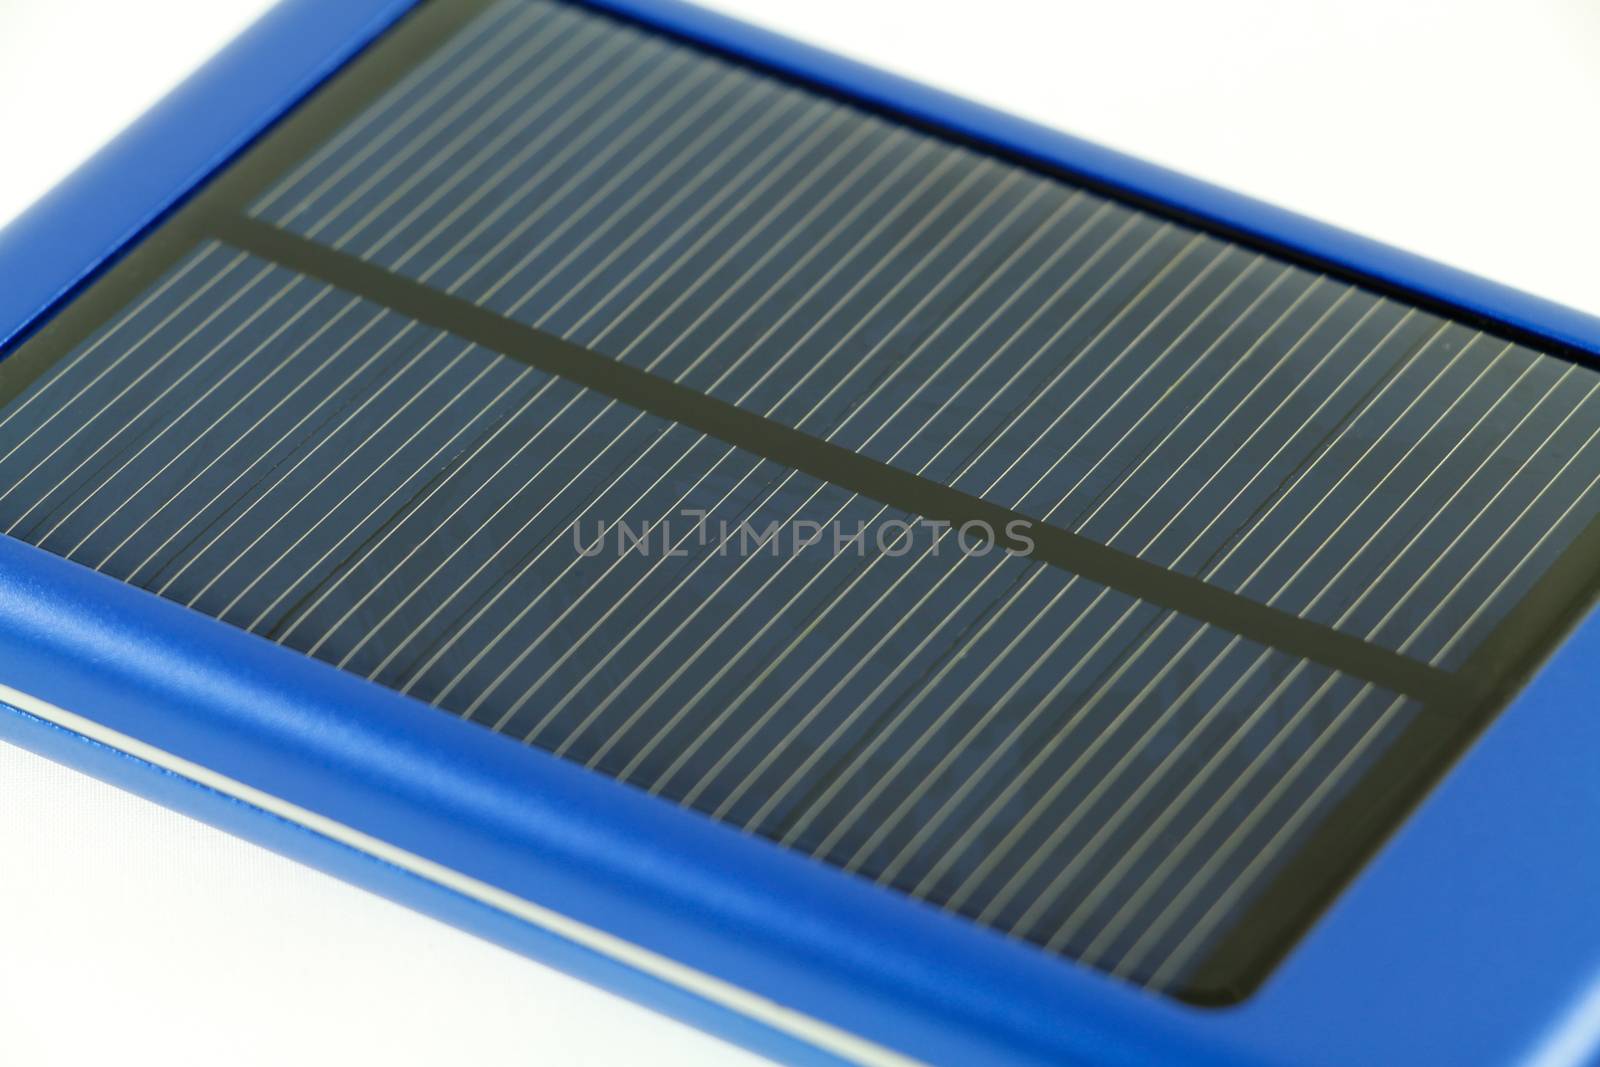 Solar charger on white background